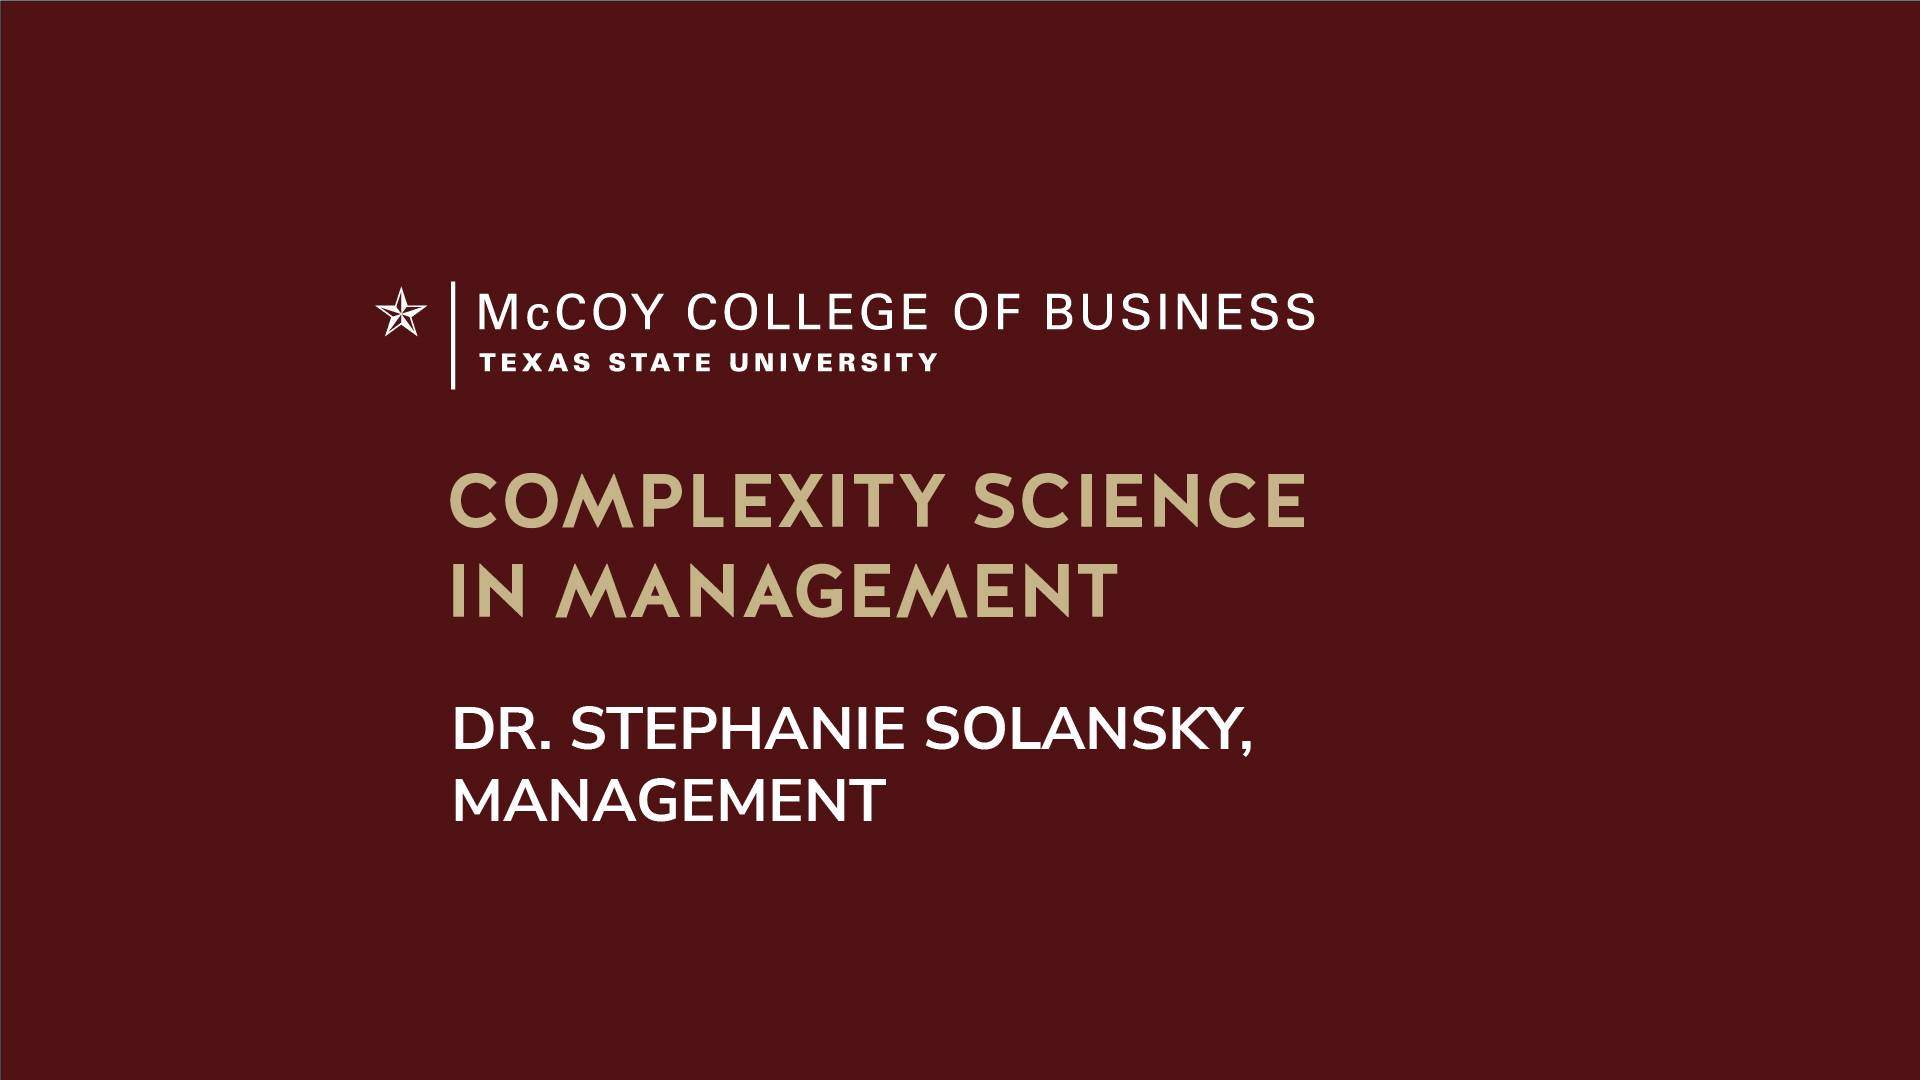 Dr. Stephanie Solansky discusses complexity science in management